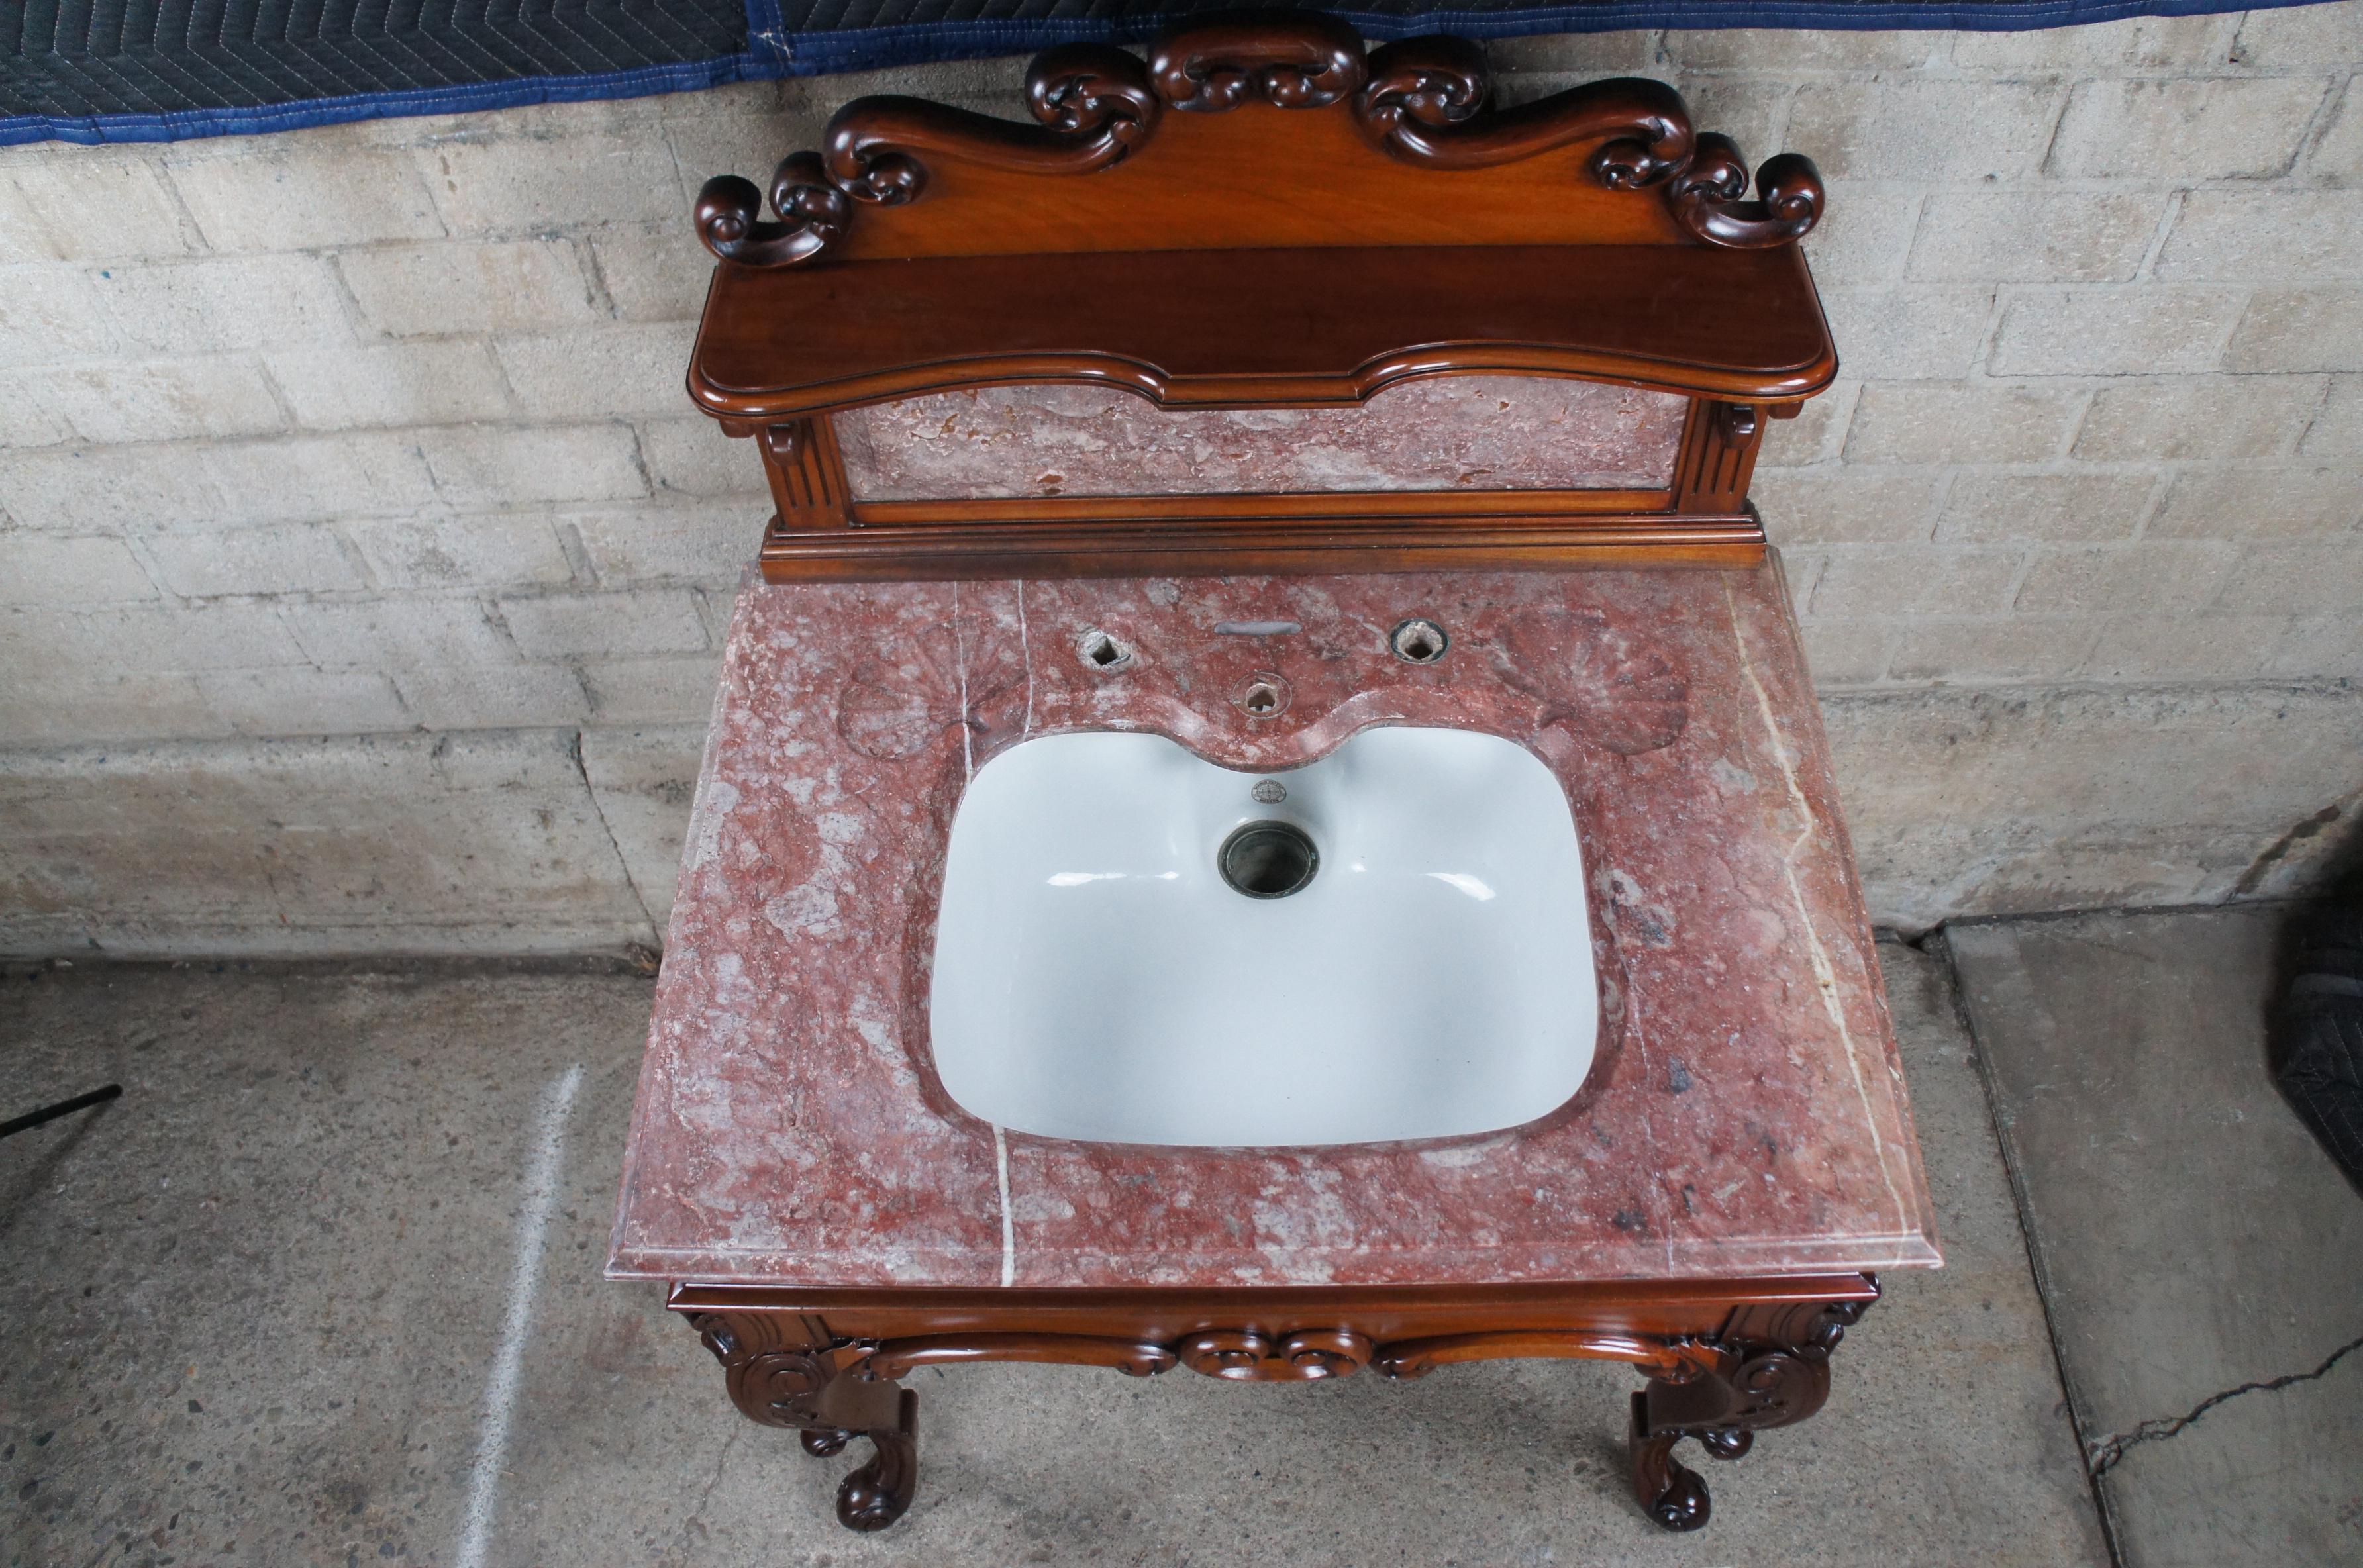 Rare Antique French Victorian Mahogany Marble Top Bathroom Vanity Porcelain Sink For Sale 4